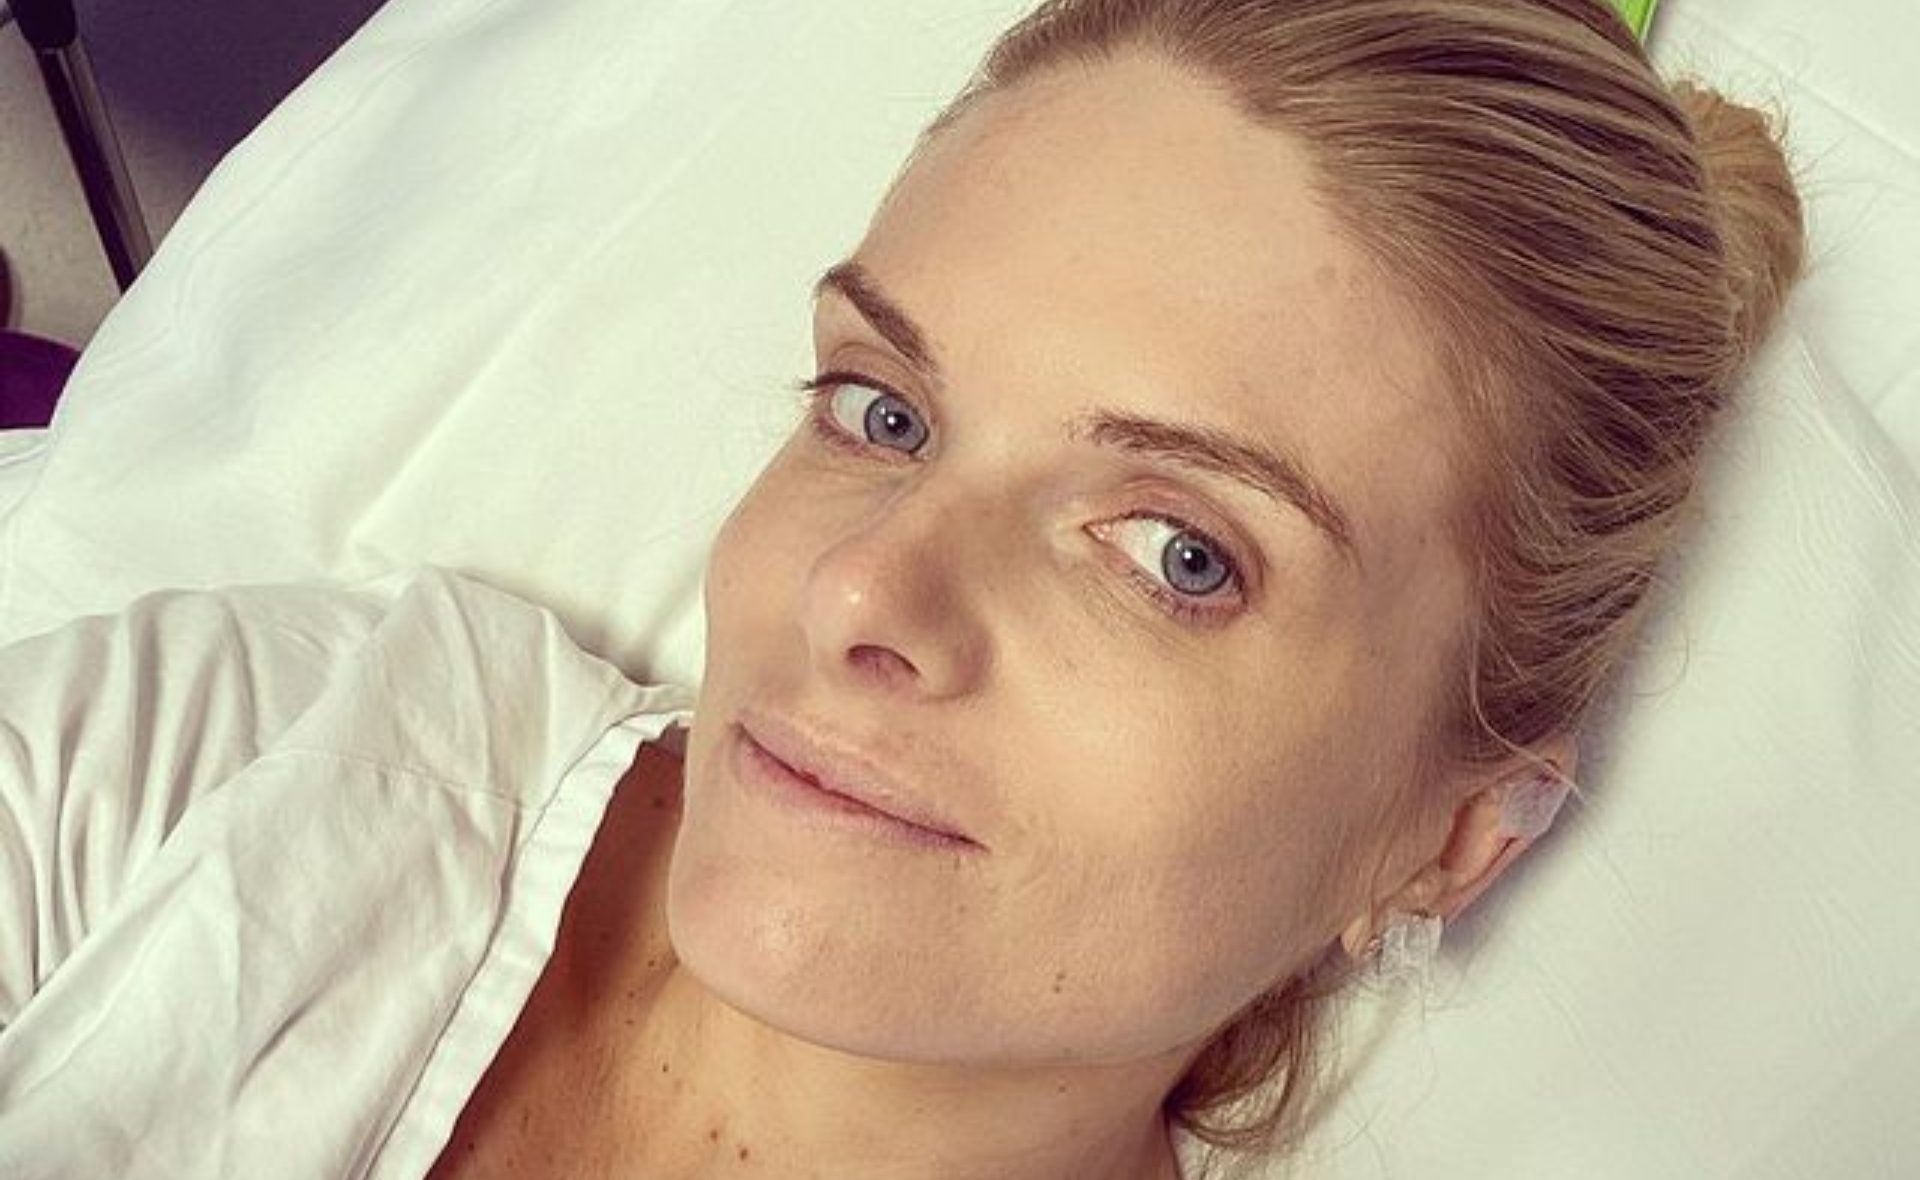 “Have a conversation – be aware”: Erin Molan shares a poignant reminder from hosptial